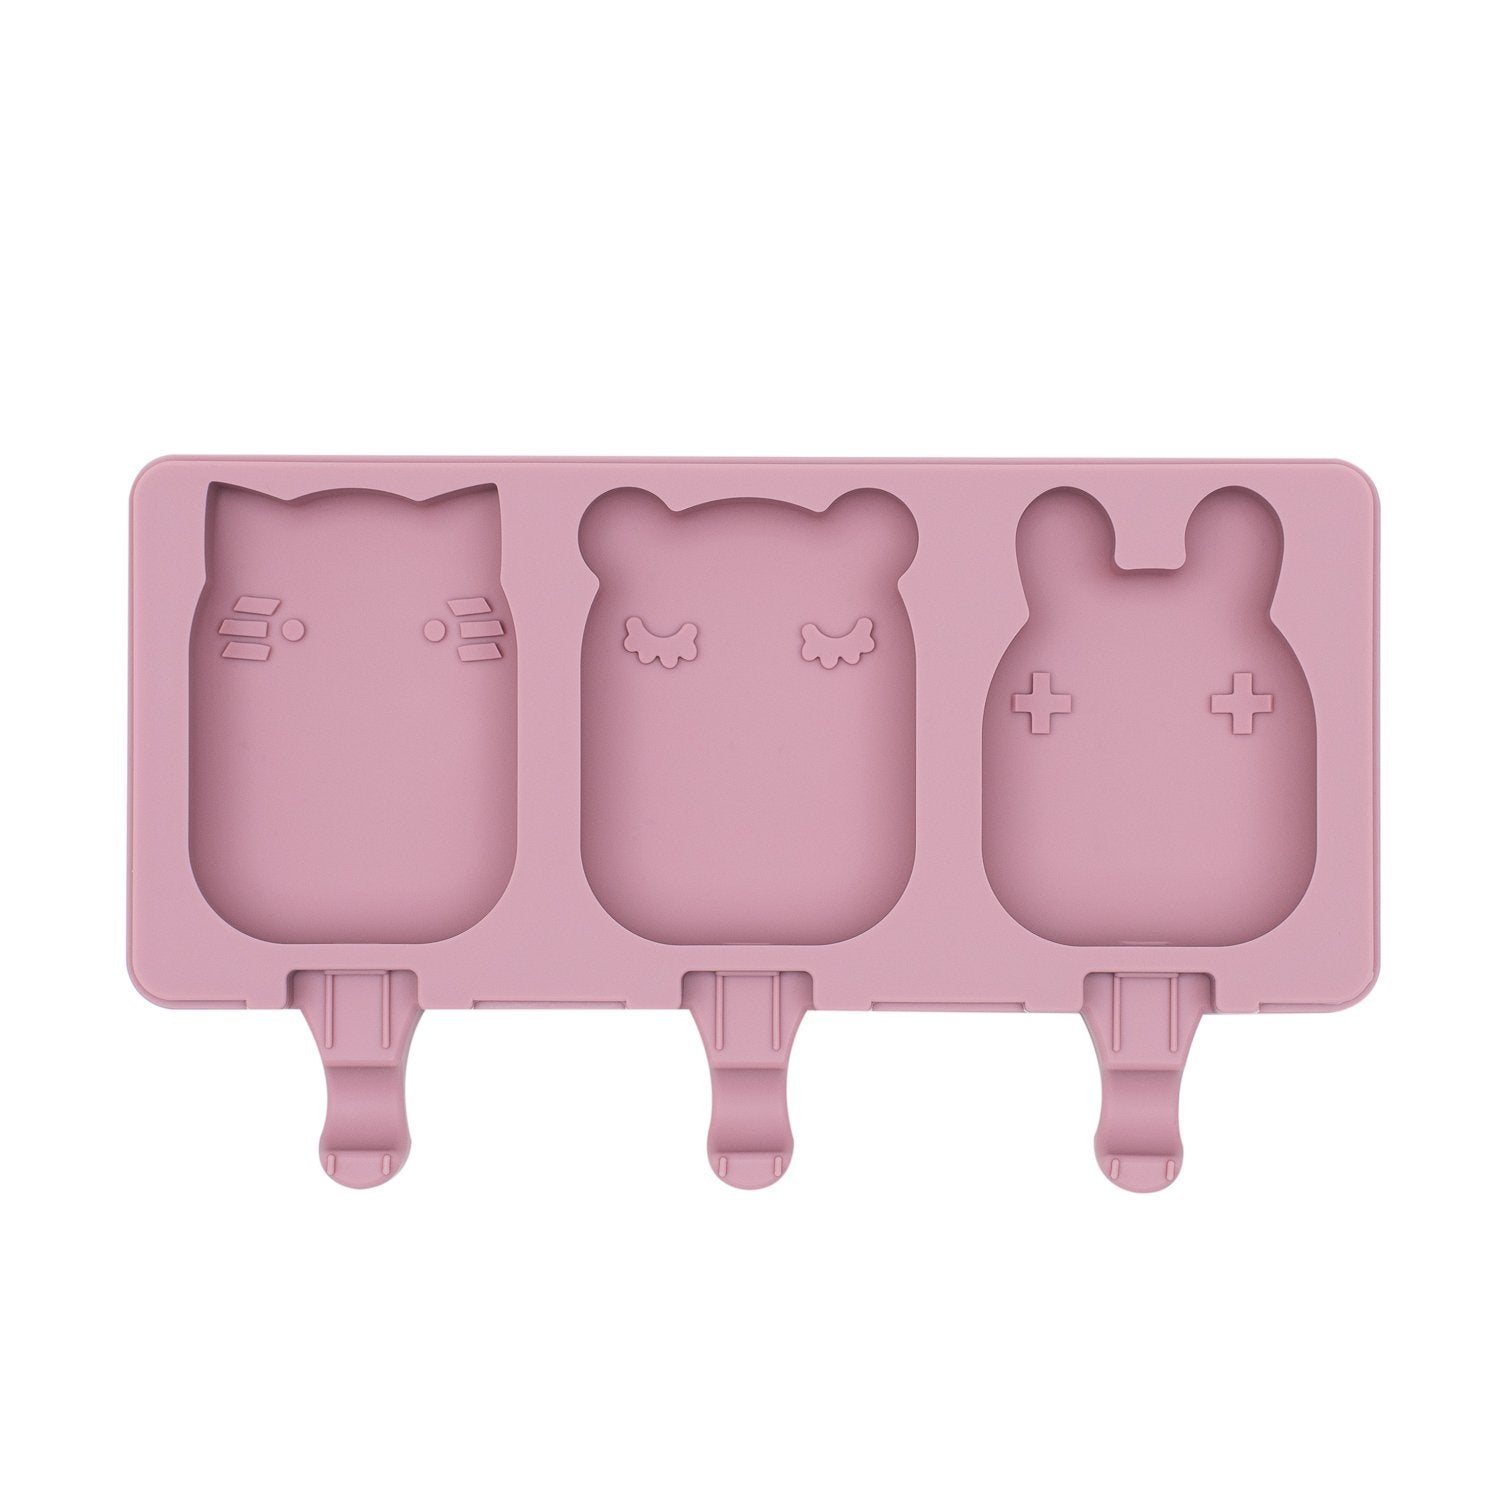 Frosties Icy Pole Mould (Dusty Rose)